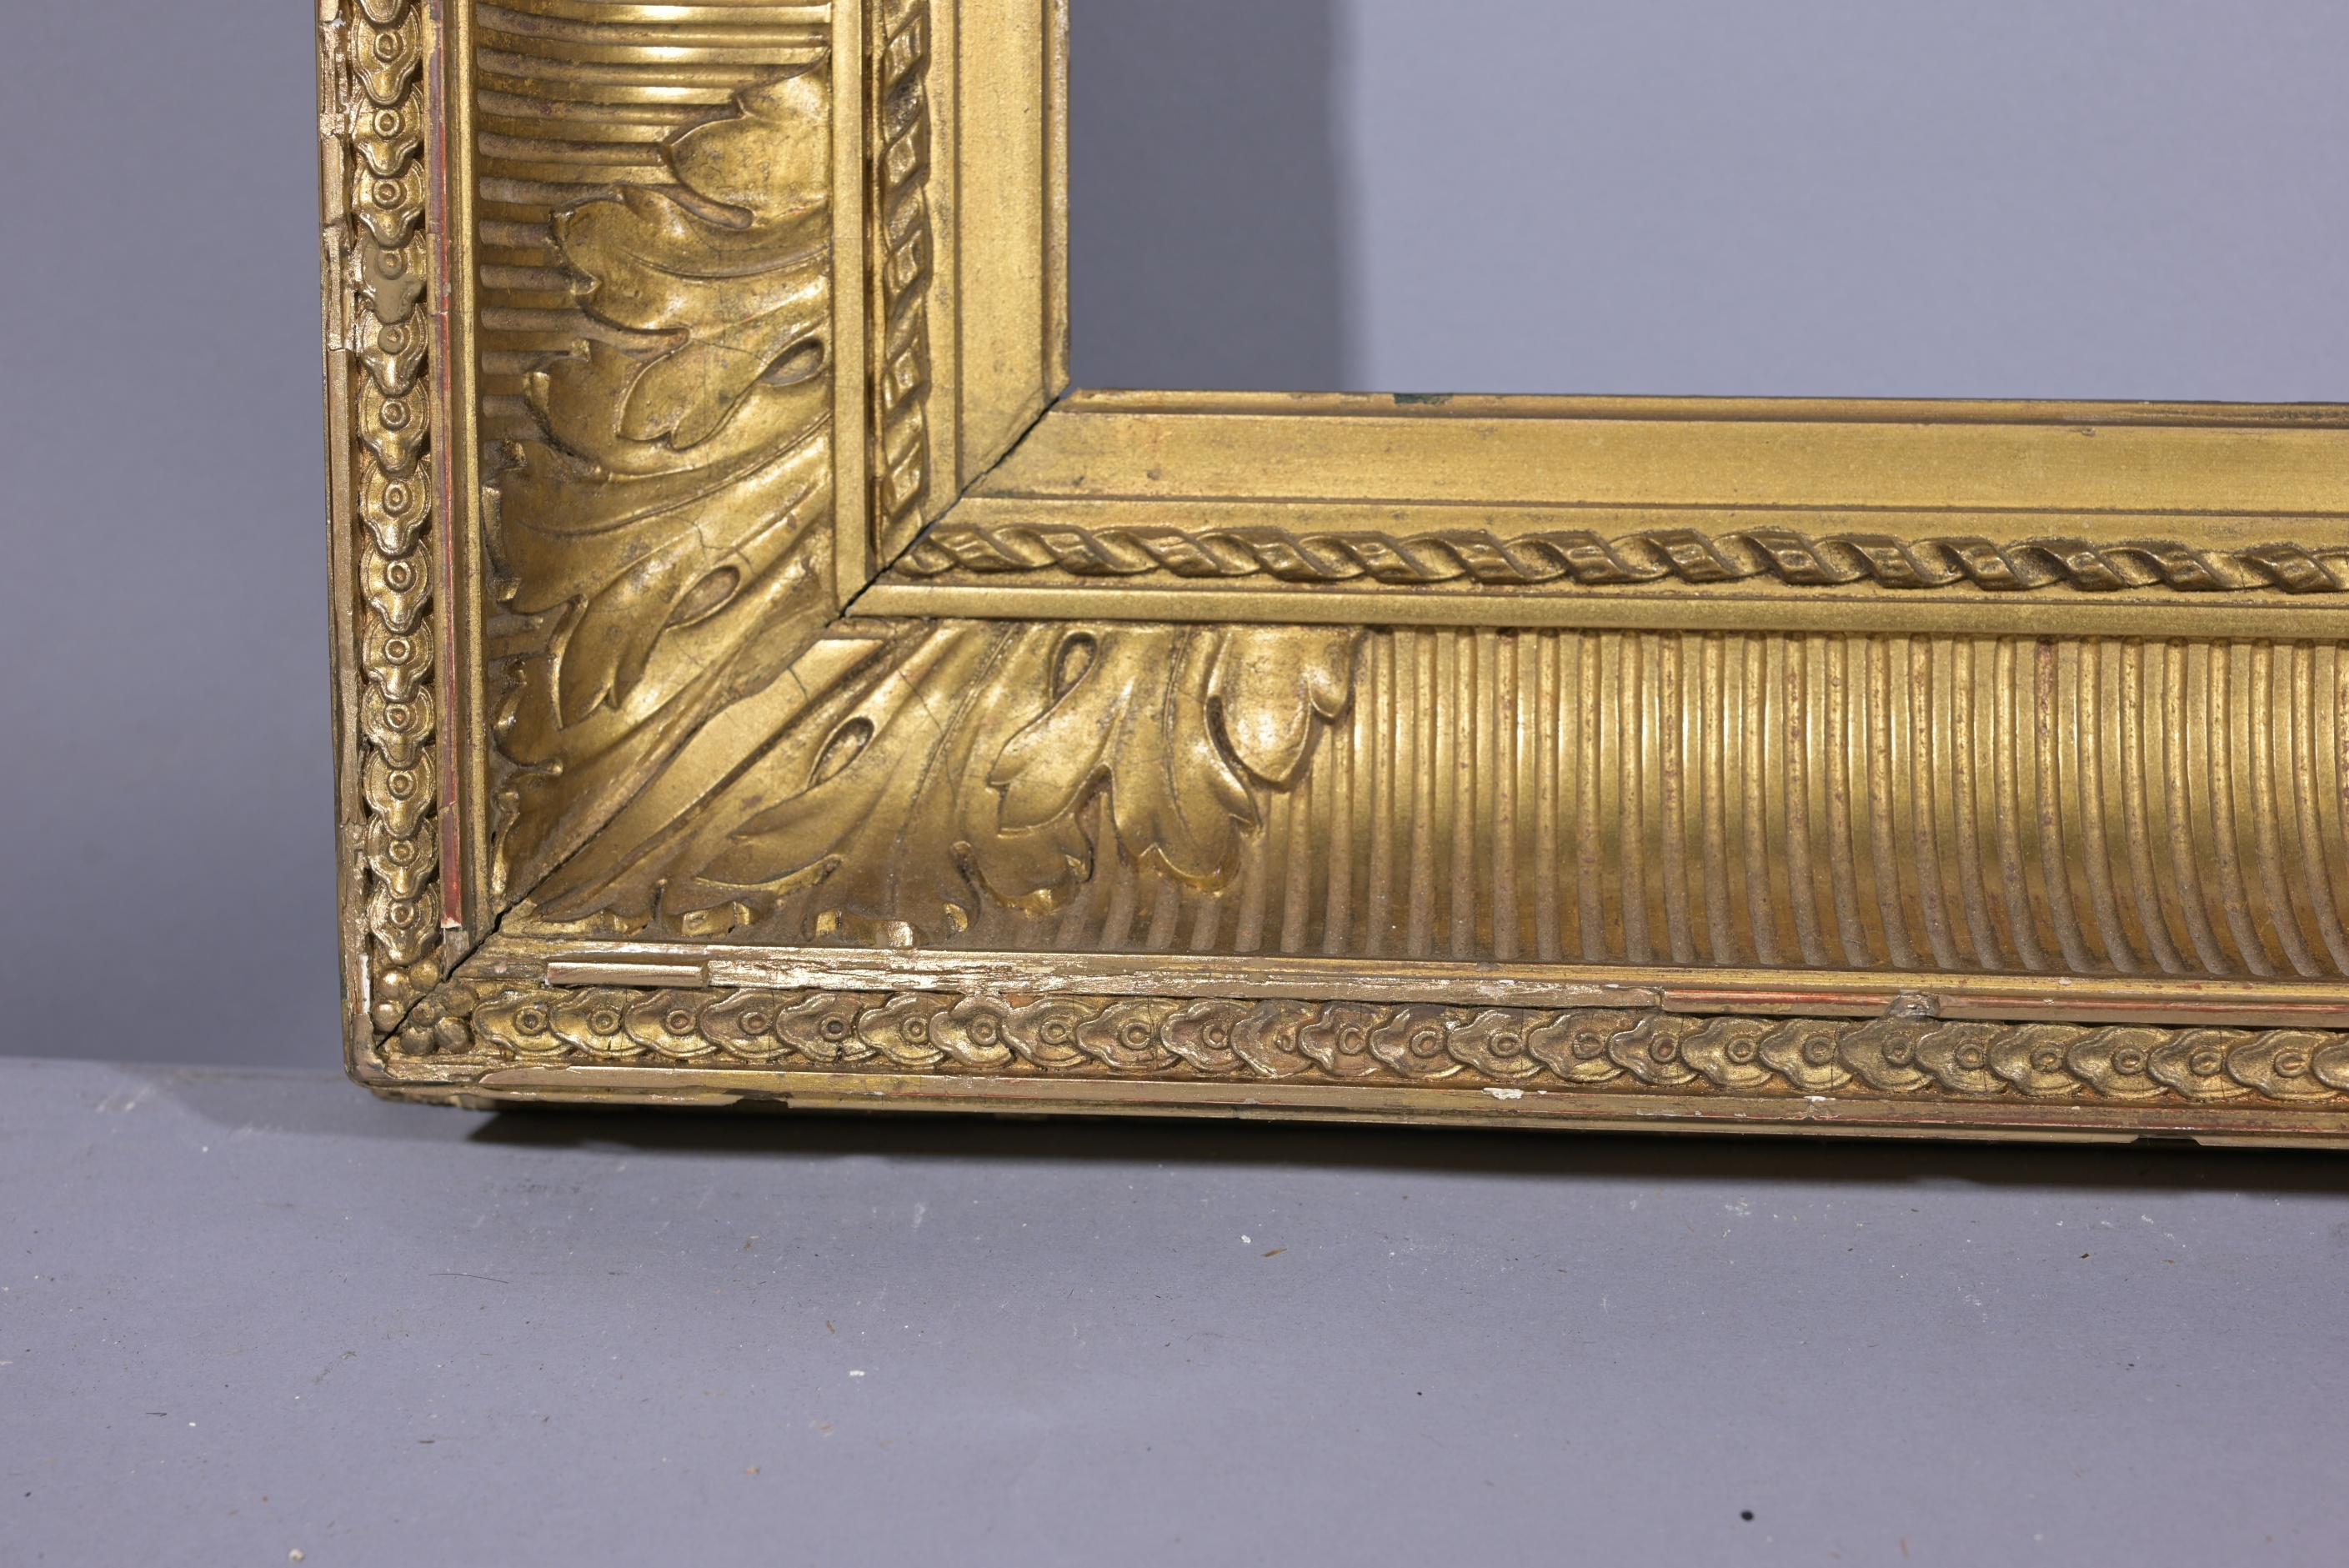 French 1860's Gilt Frame - 29.75 x 20.25 - Image 6 of 8